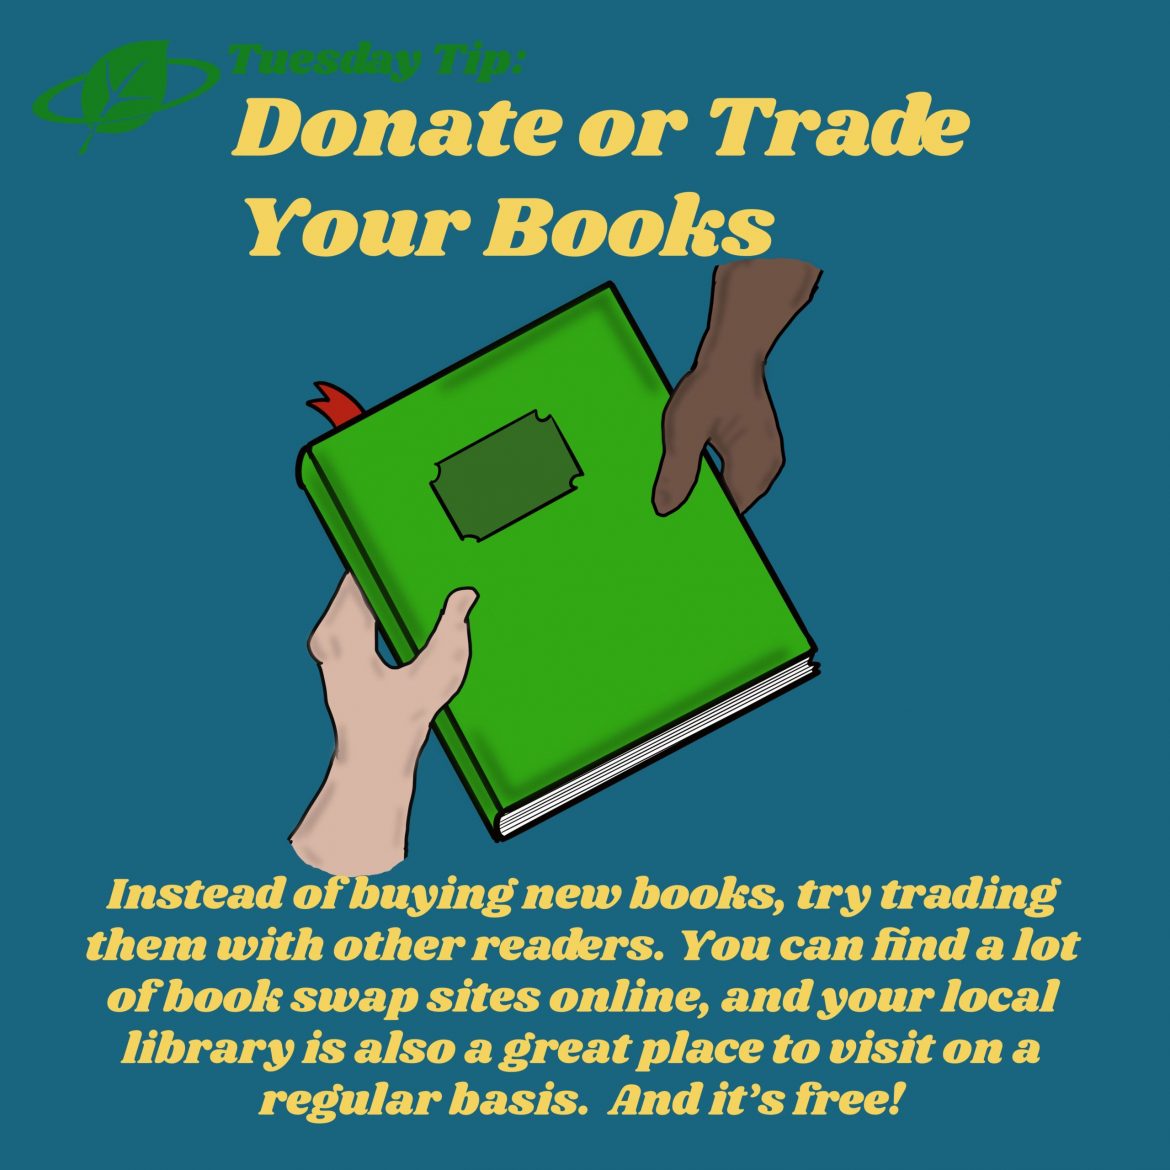 Donate or Trade Your Books | Tuesday Tip